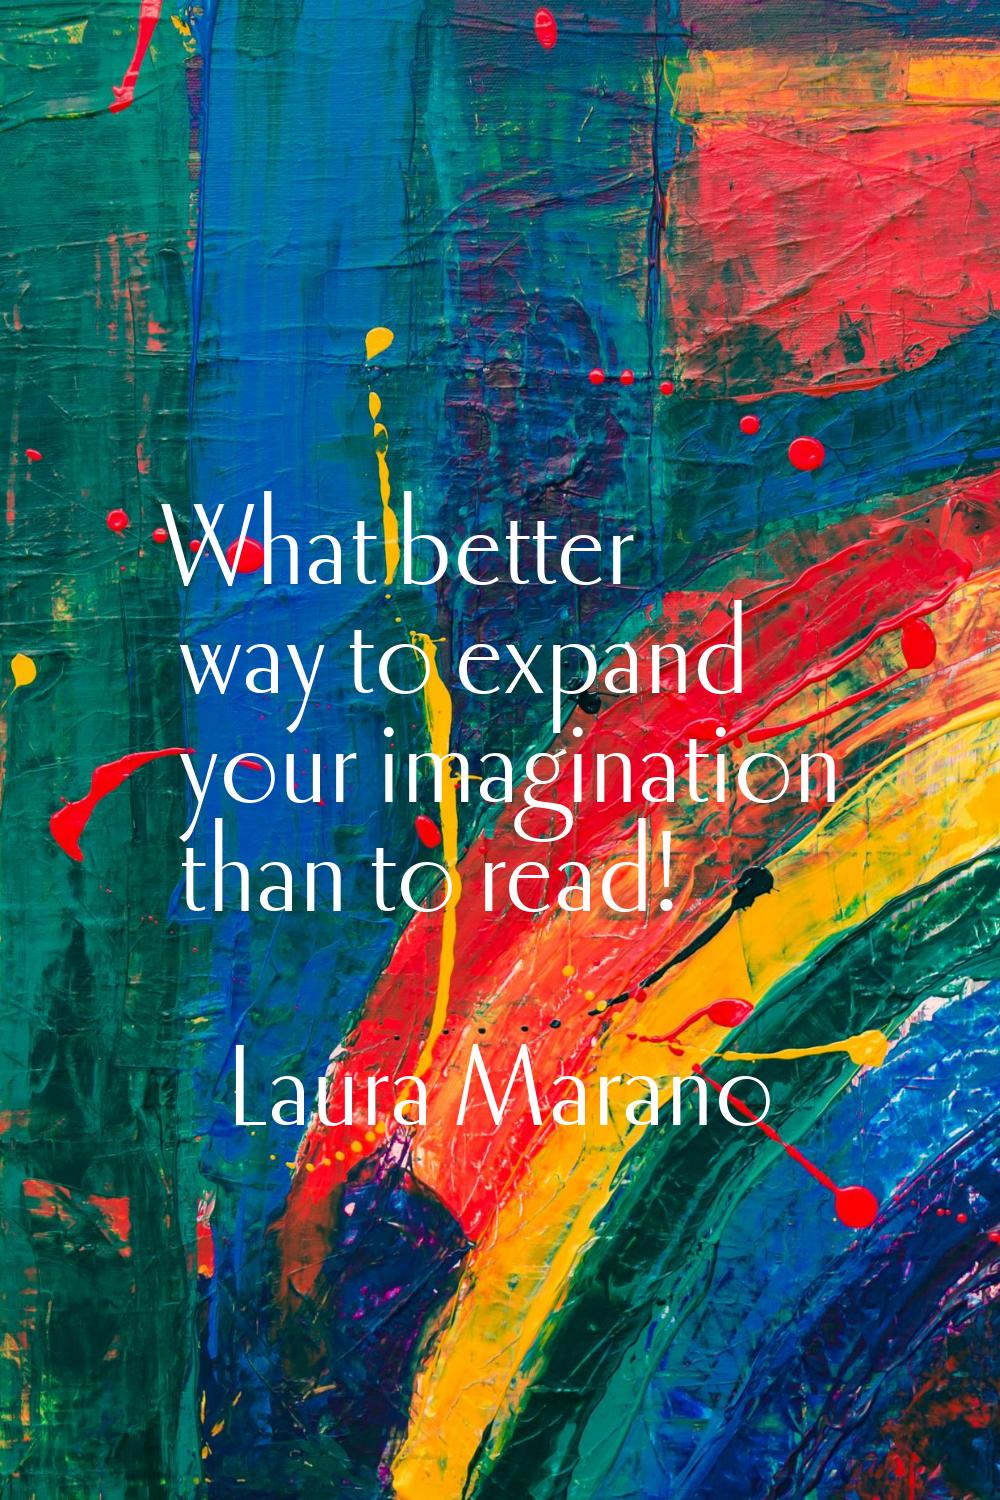 What better way to expand your imagination than to read!